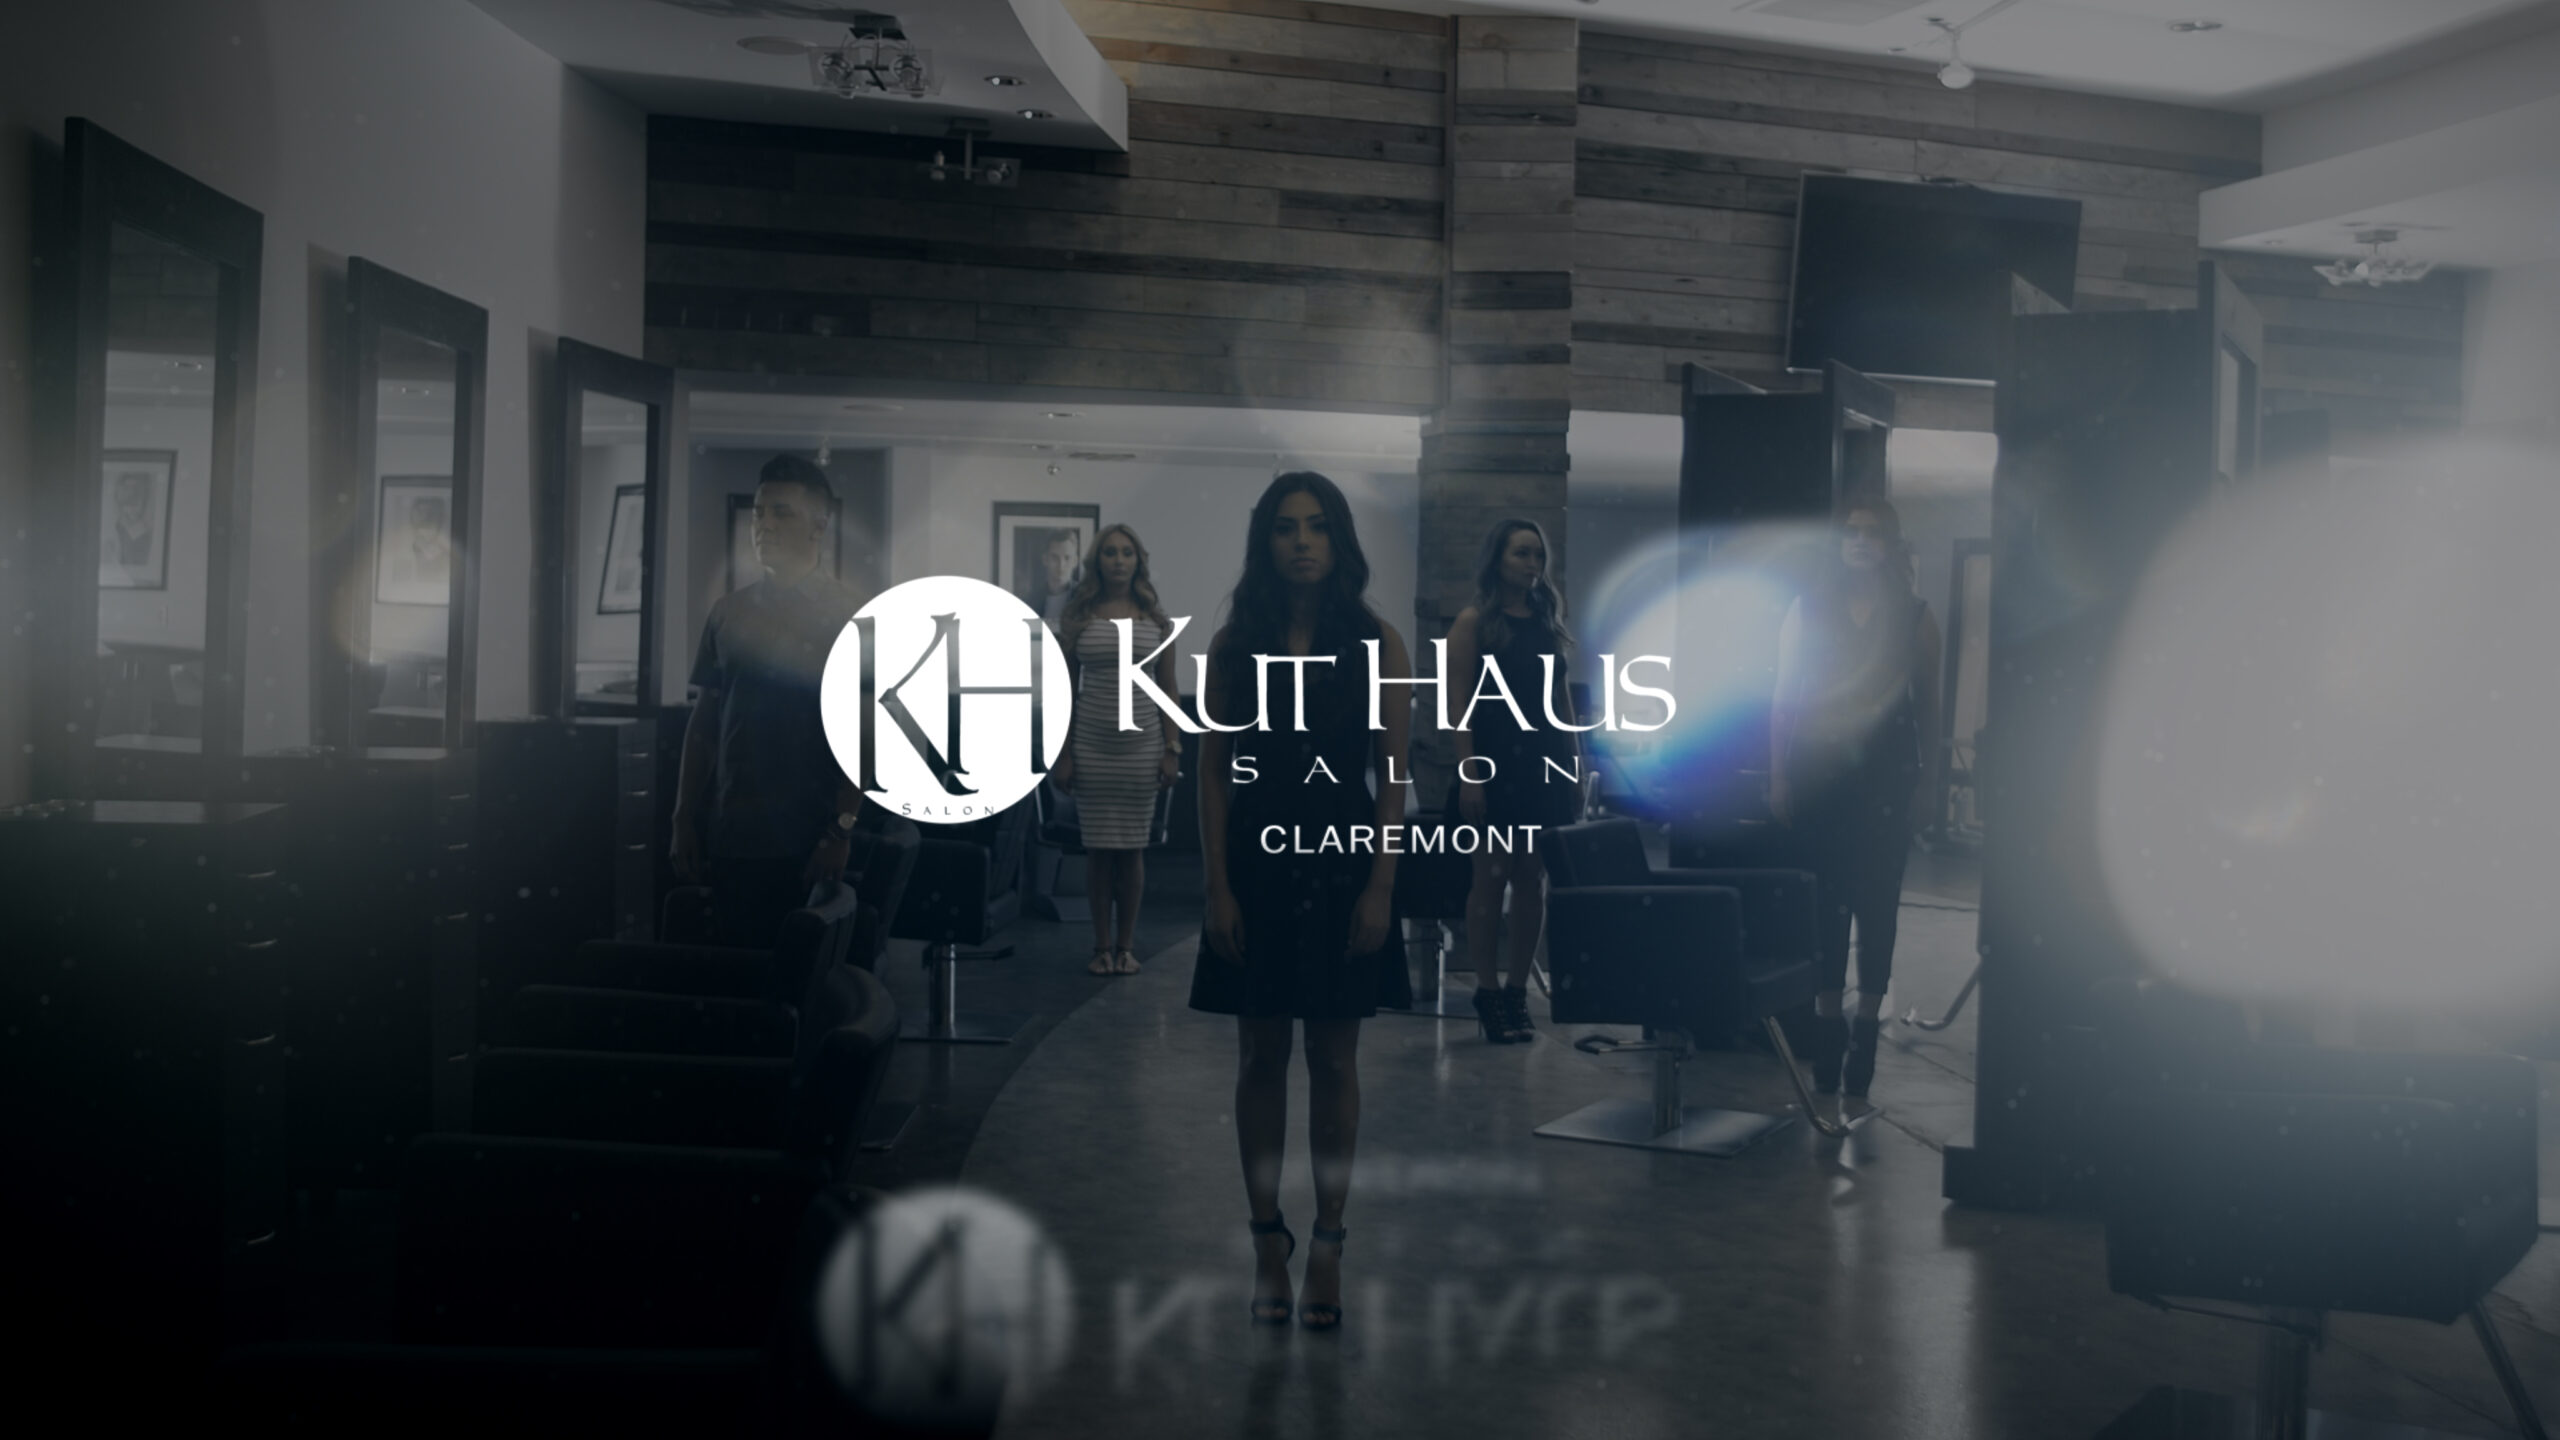 Kut Haus Salon showcasing their professional hair services and salon experience.